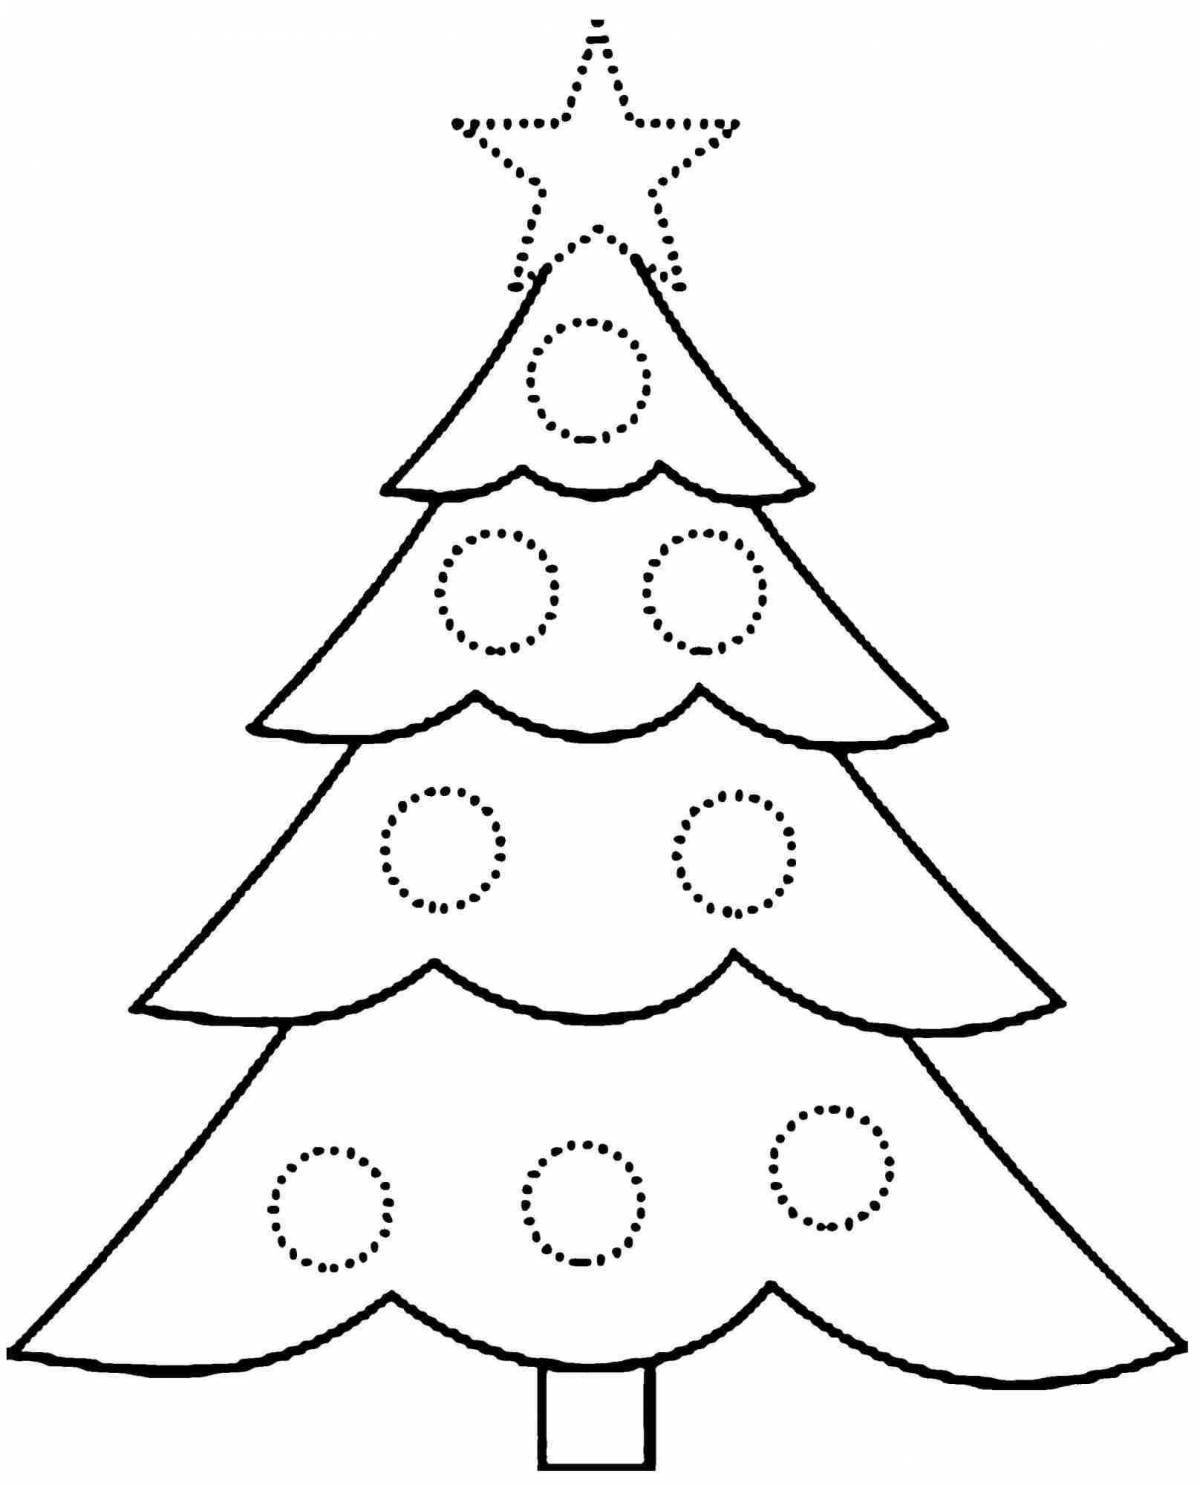 Exuberant Christmas tree drawing for kids